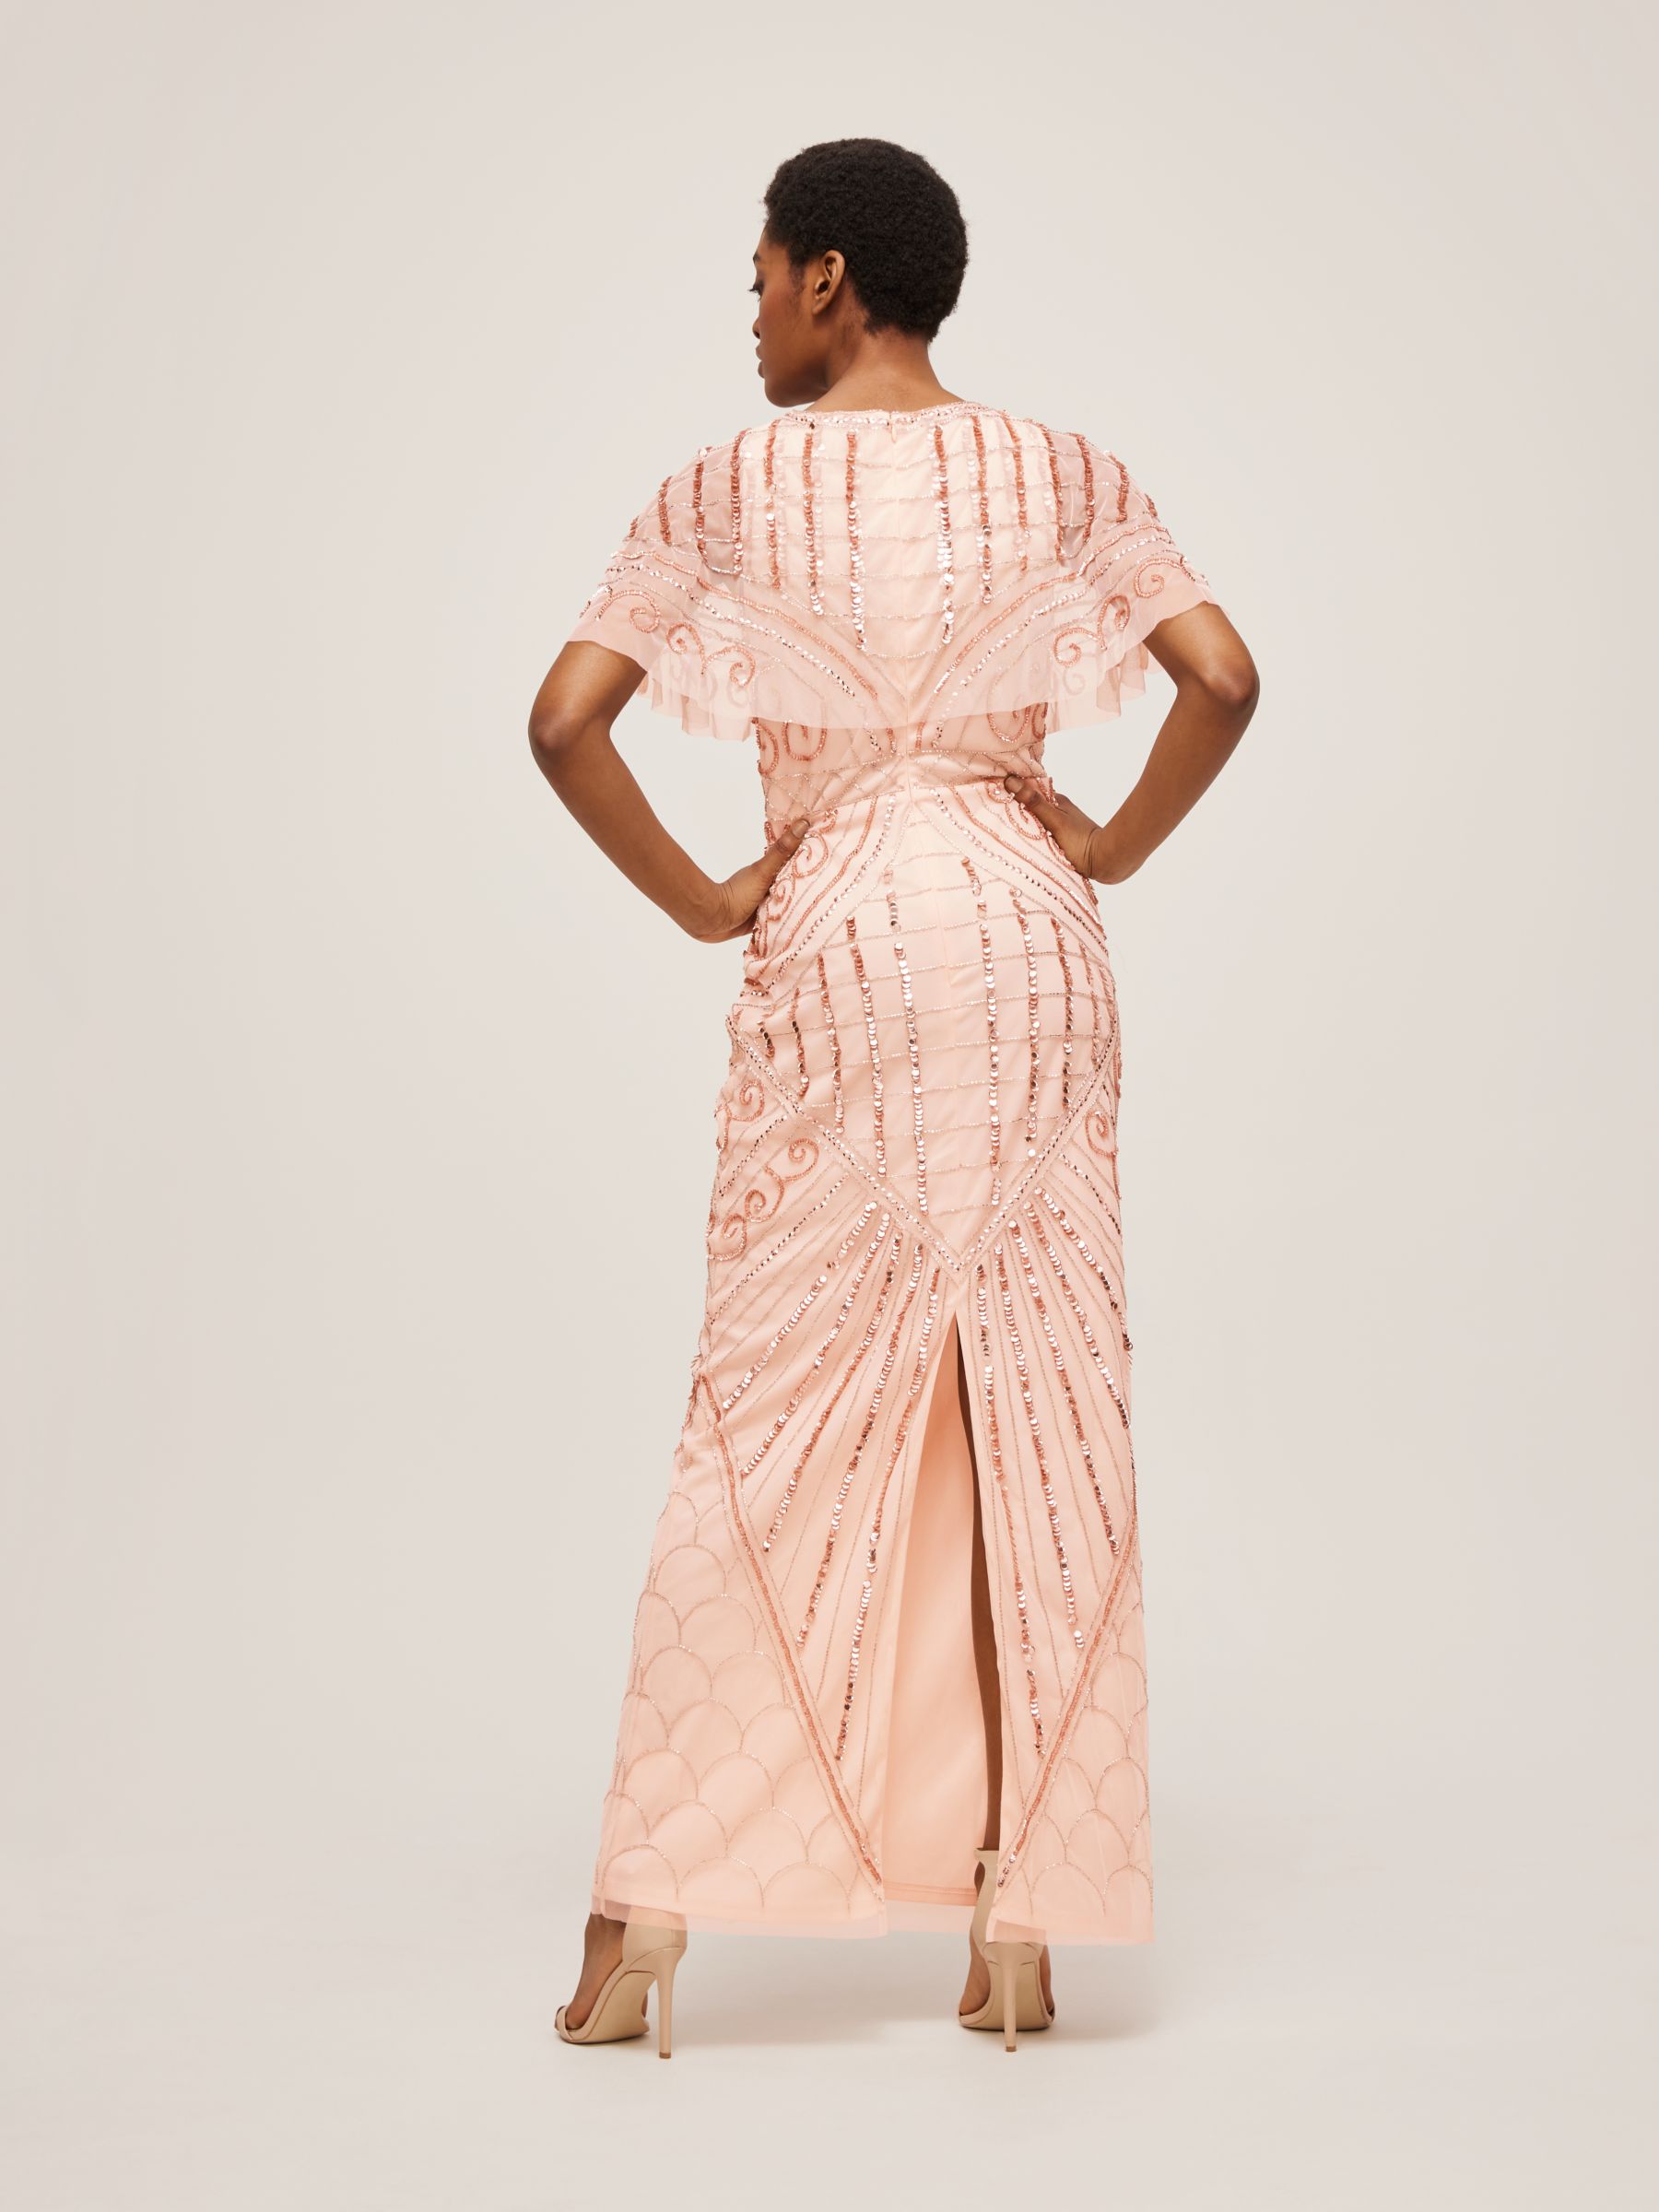 Buy Lace & Beads Marshall Sequin Embellished Cape Sleeve Maxi Dress Online at johnlewis.com